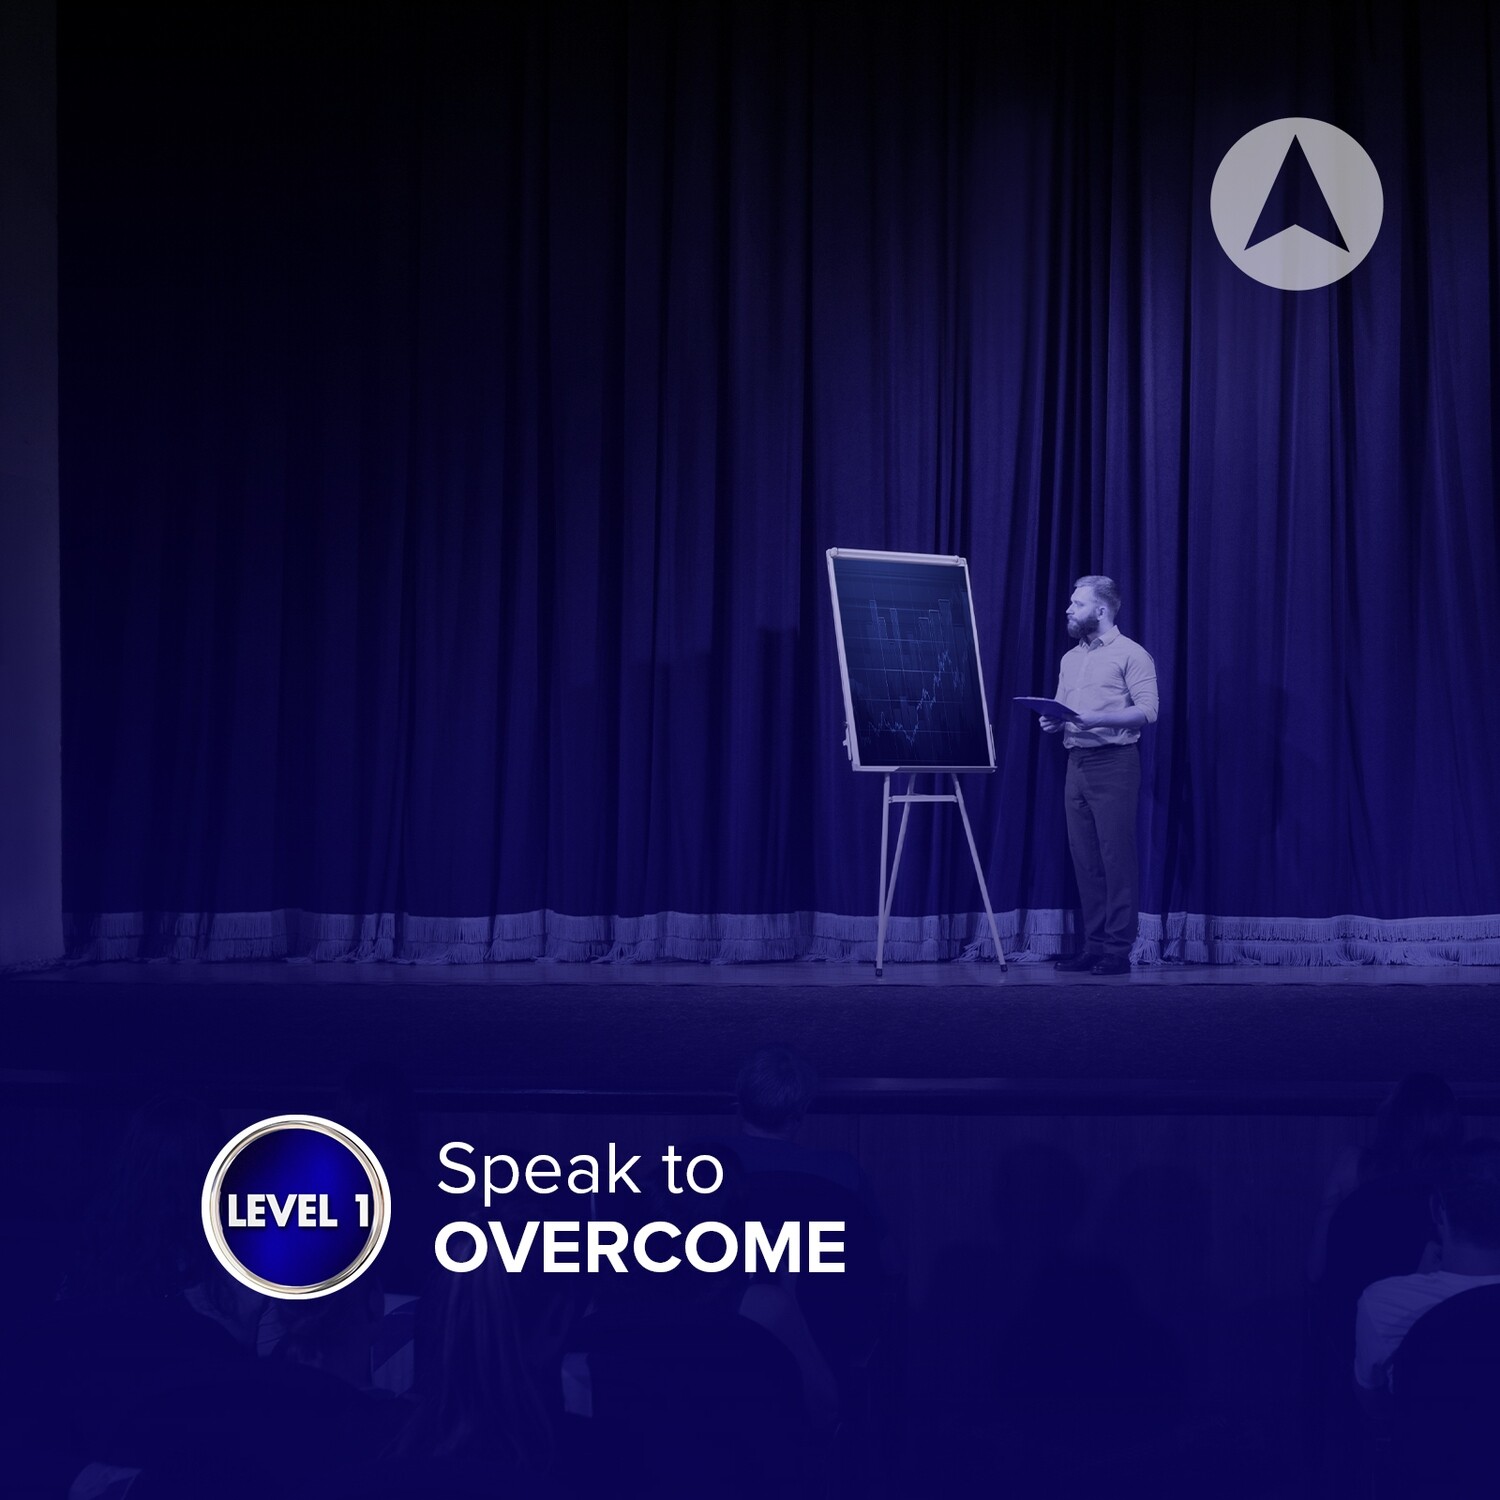 SPEAK TO OVERCOME - Overcome your public presentation anxiety in 30 days